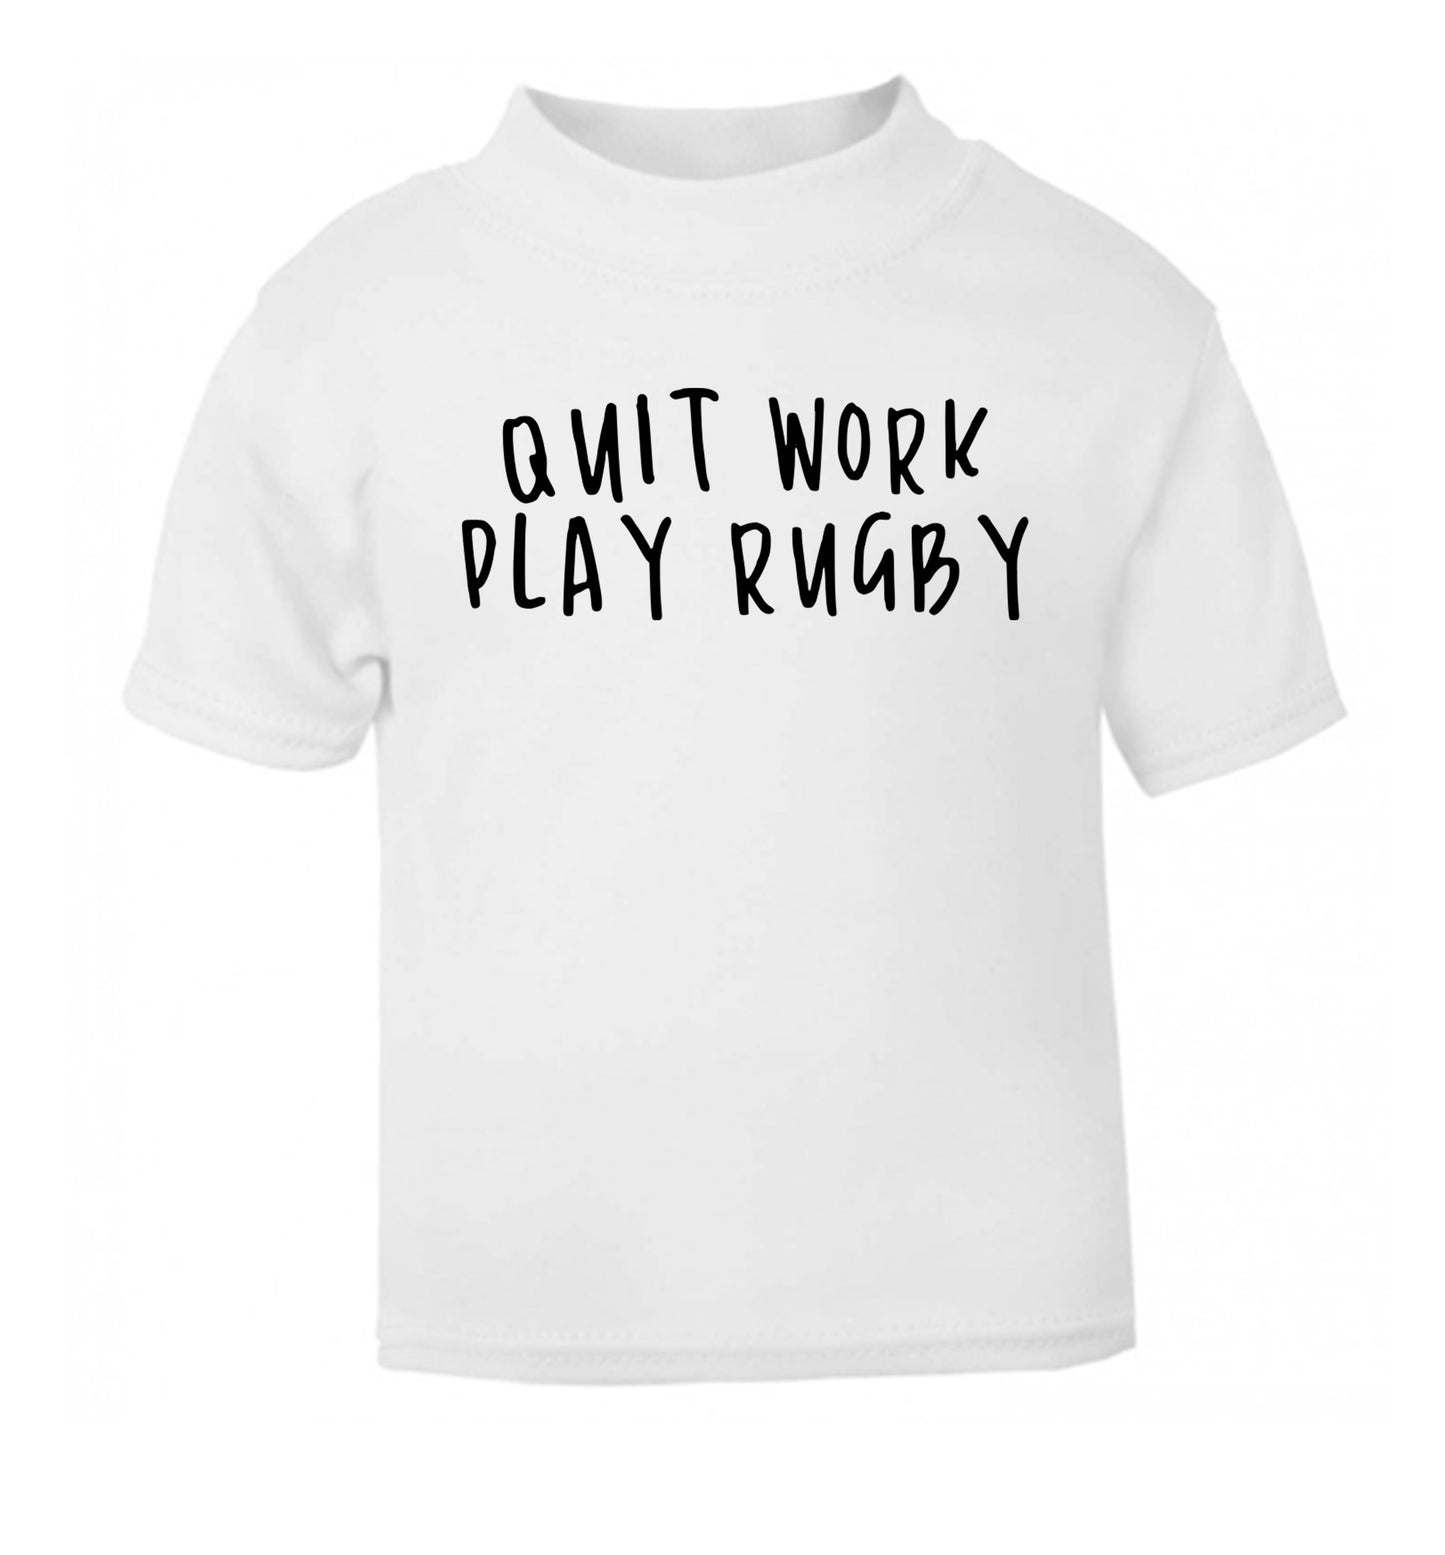 Quit work play rugby white Baby Toddler Tshirt 2 Years